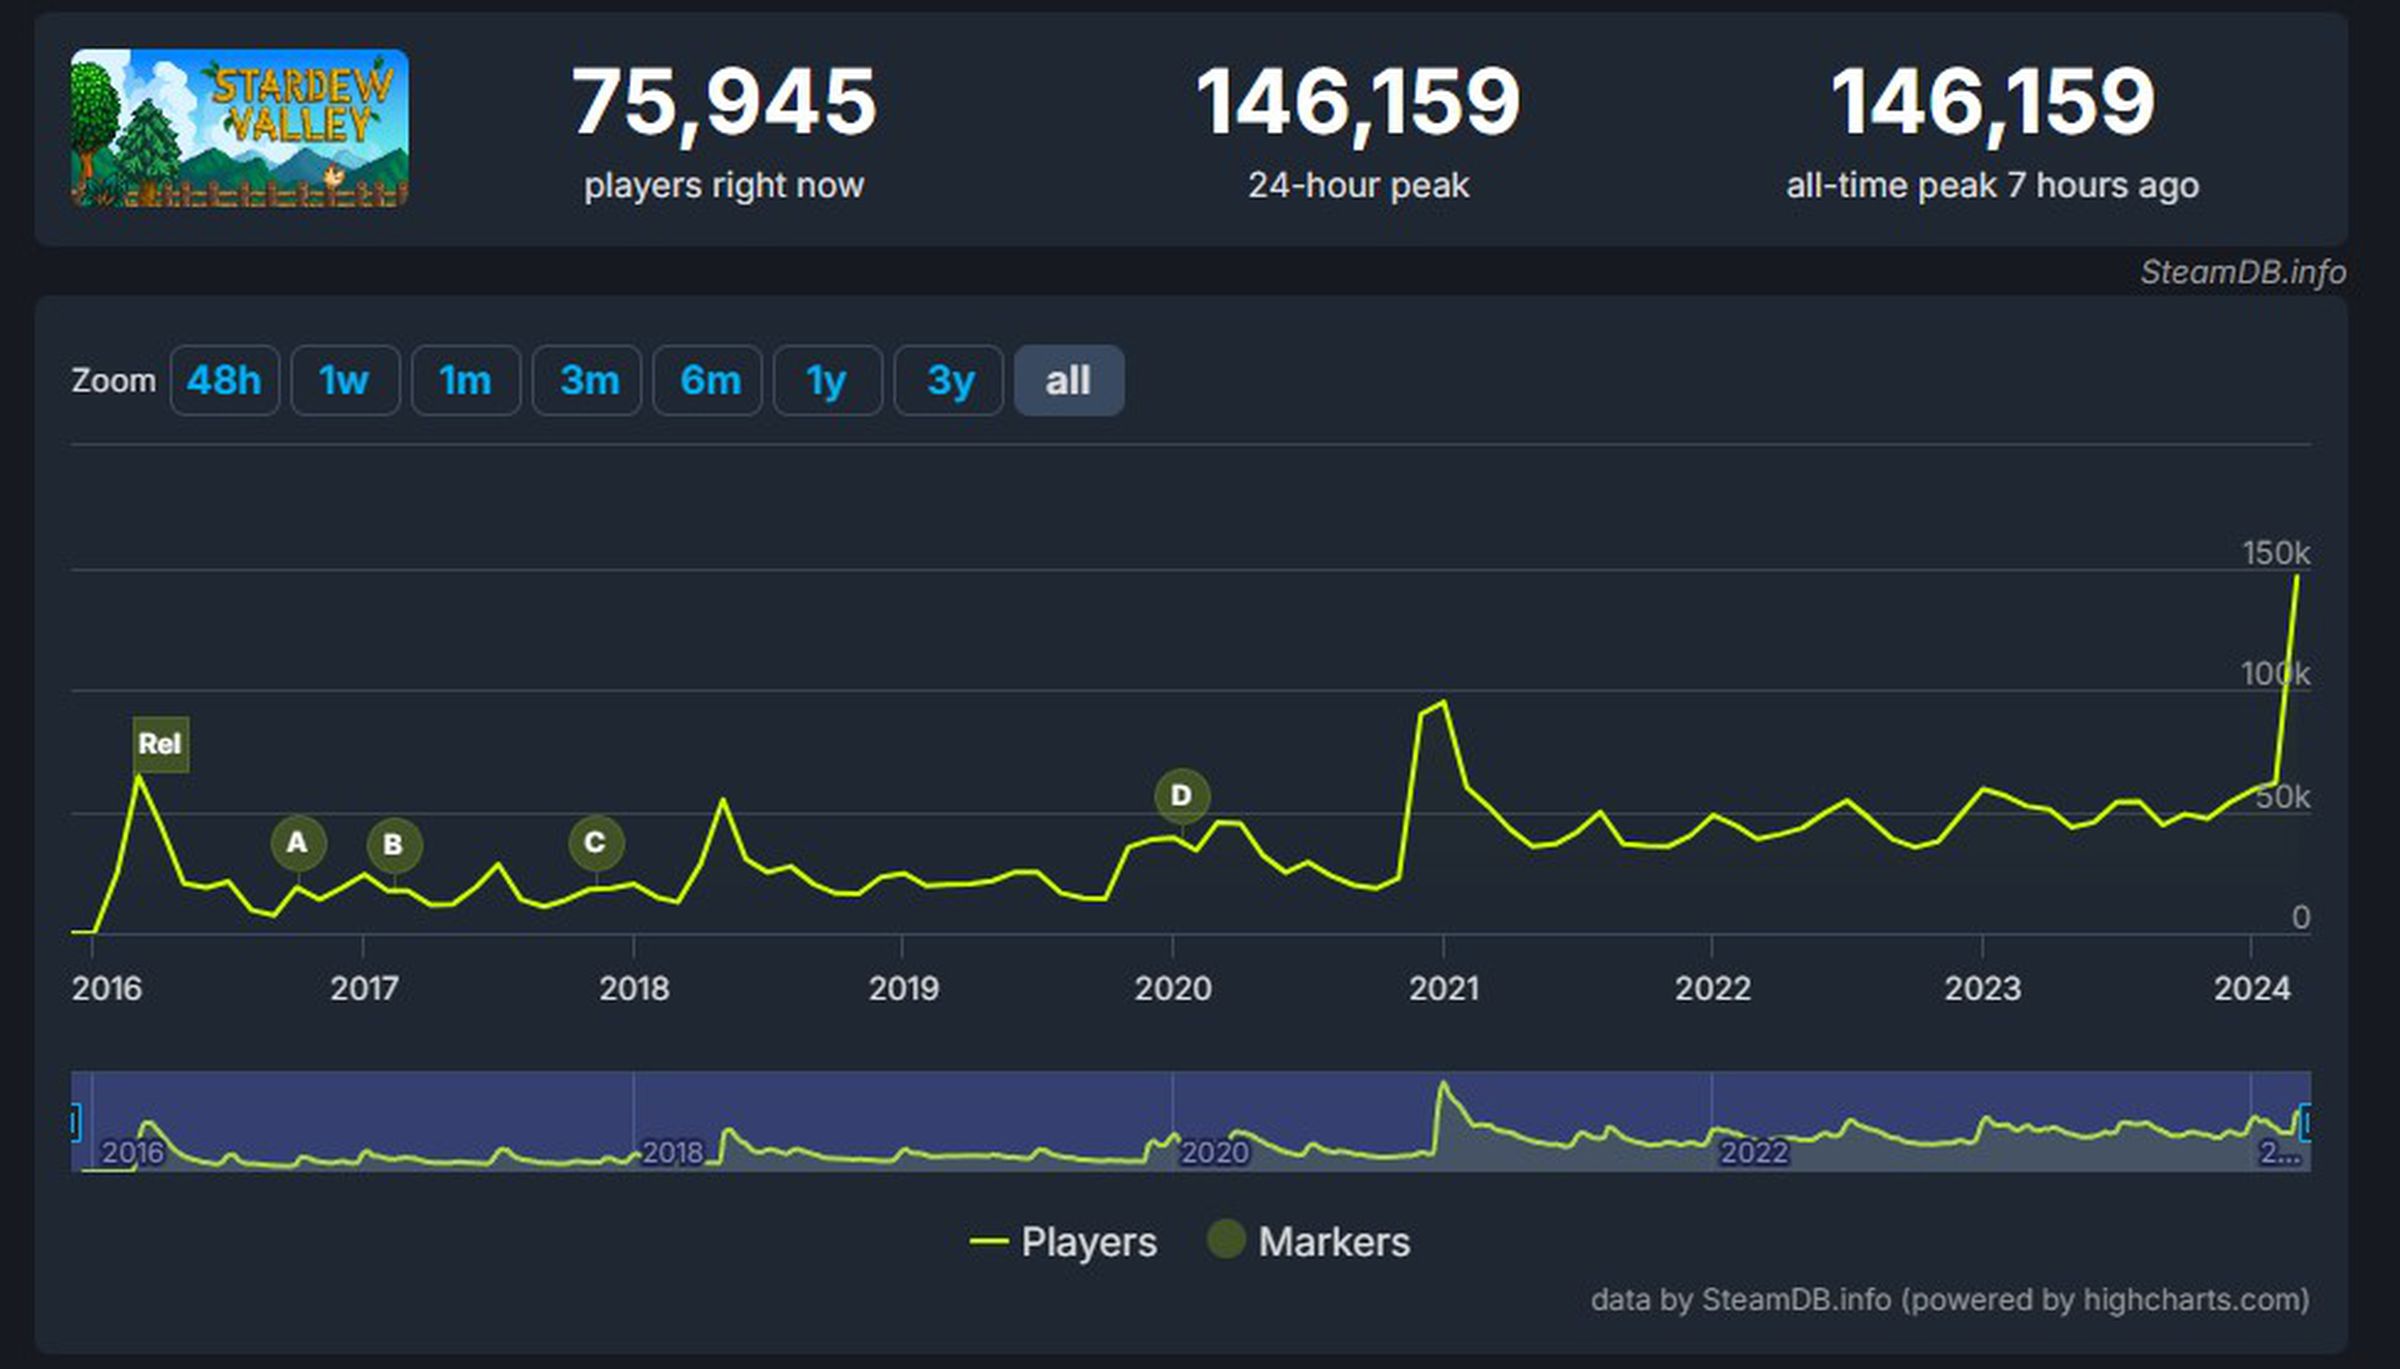 A screenshot taken of the Stardew Valley player count numbers for Steam.